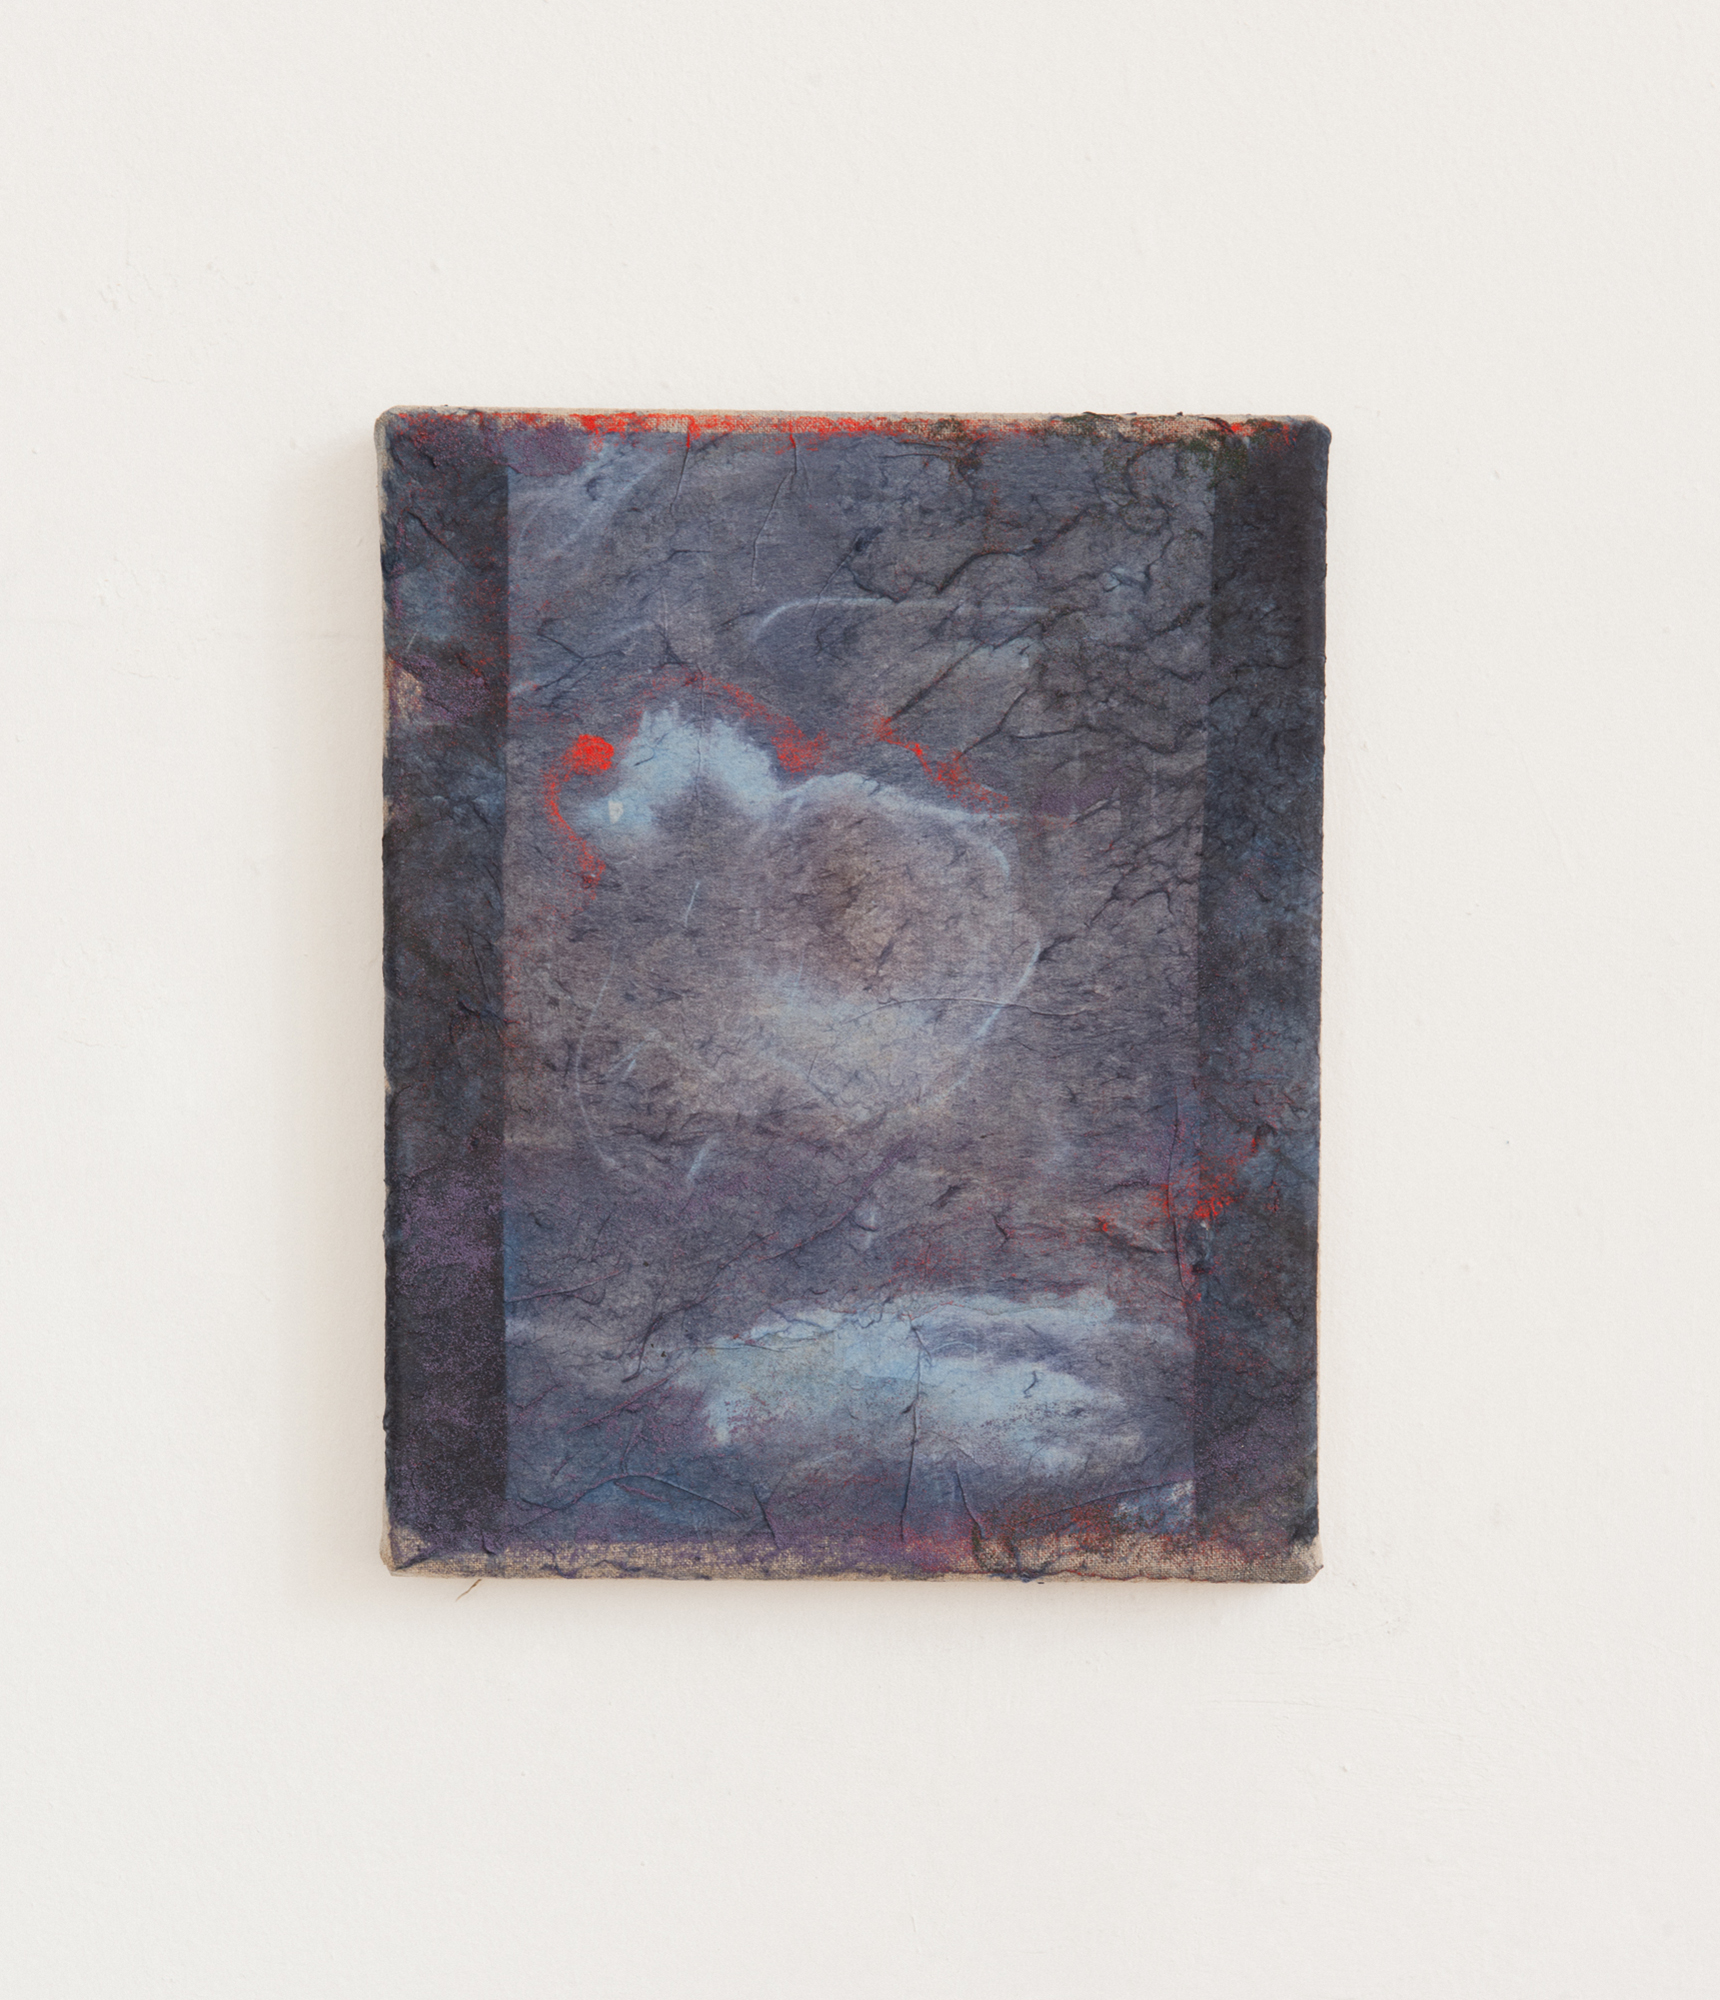 Olga Grotova, Sunkissed, Cyanotype rice paper, mineral pigments mounted on linen, 25.5 x 20.5 cm, 2023, Artworks © The Artist, Courtesy of Schoeni Projects and THE SHOPHOUSE, Photo by Arcalis Studio